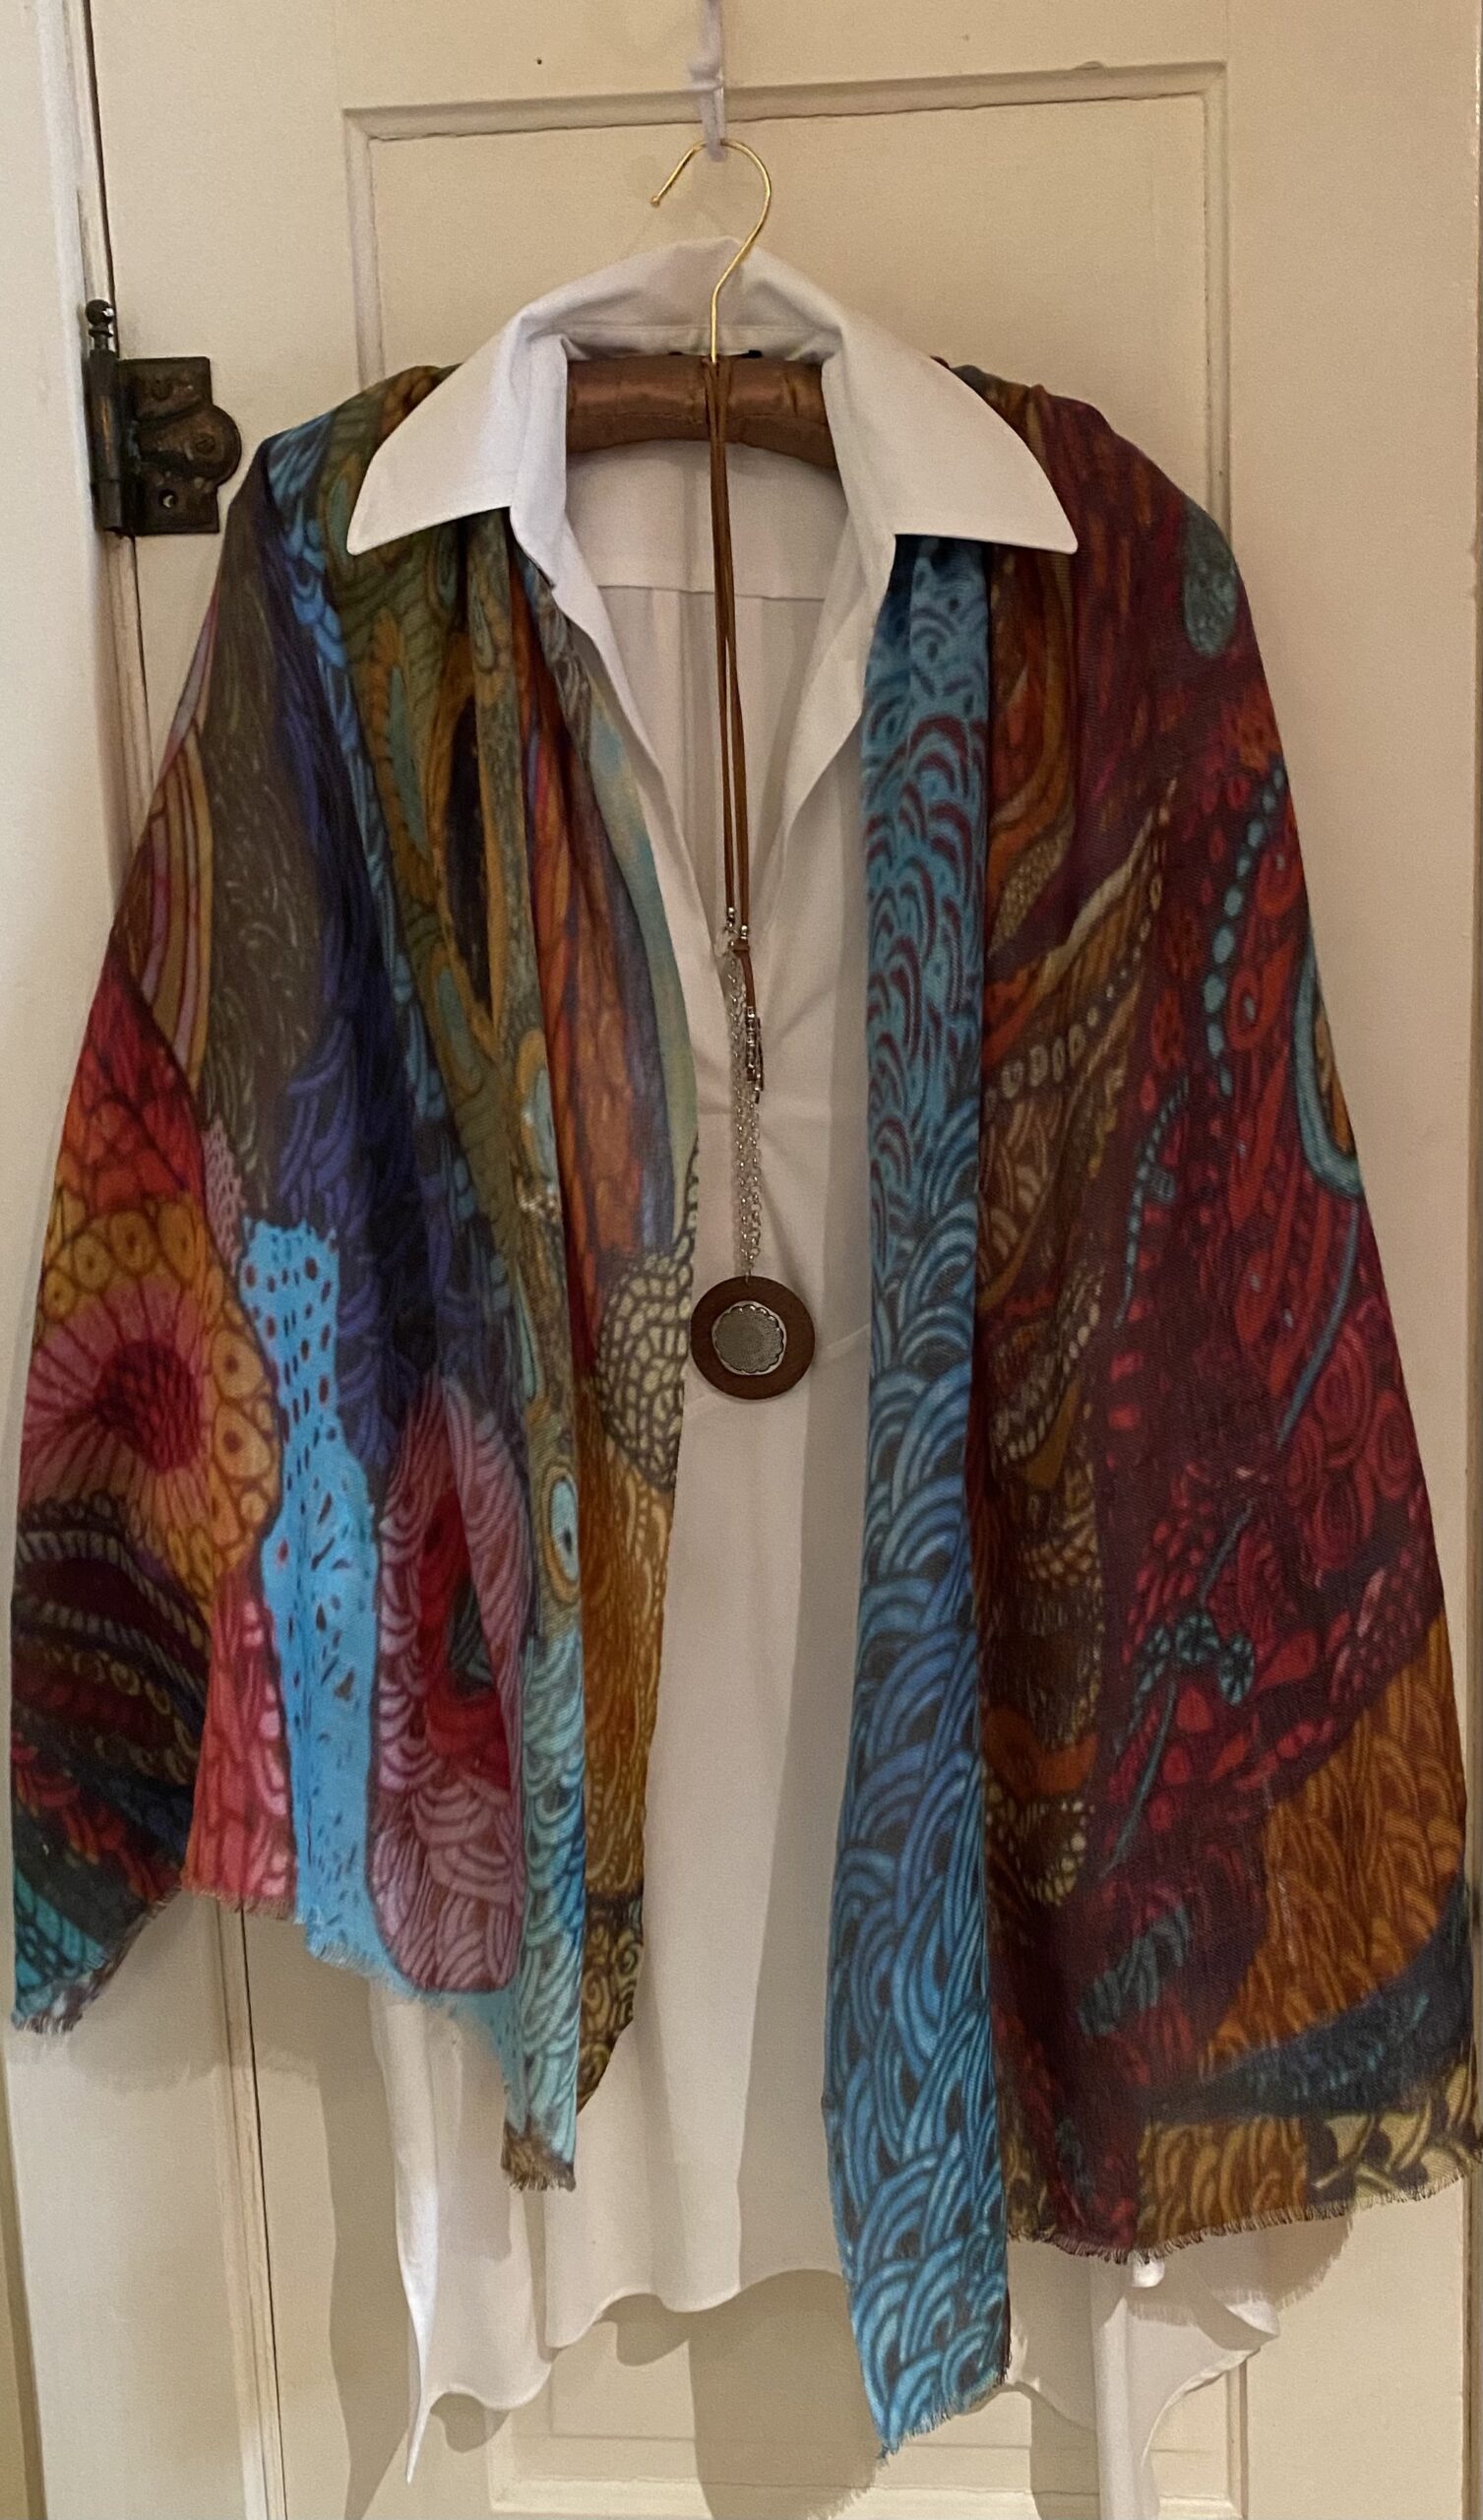 Fifth Sister Wearable Art – Fifthsister Art Gallery and Studio